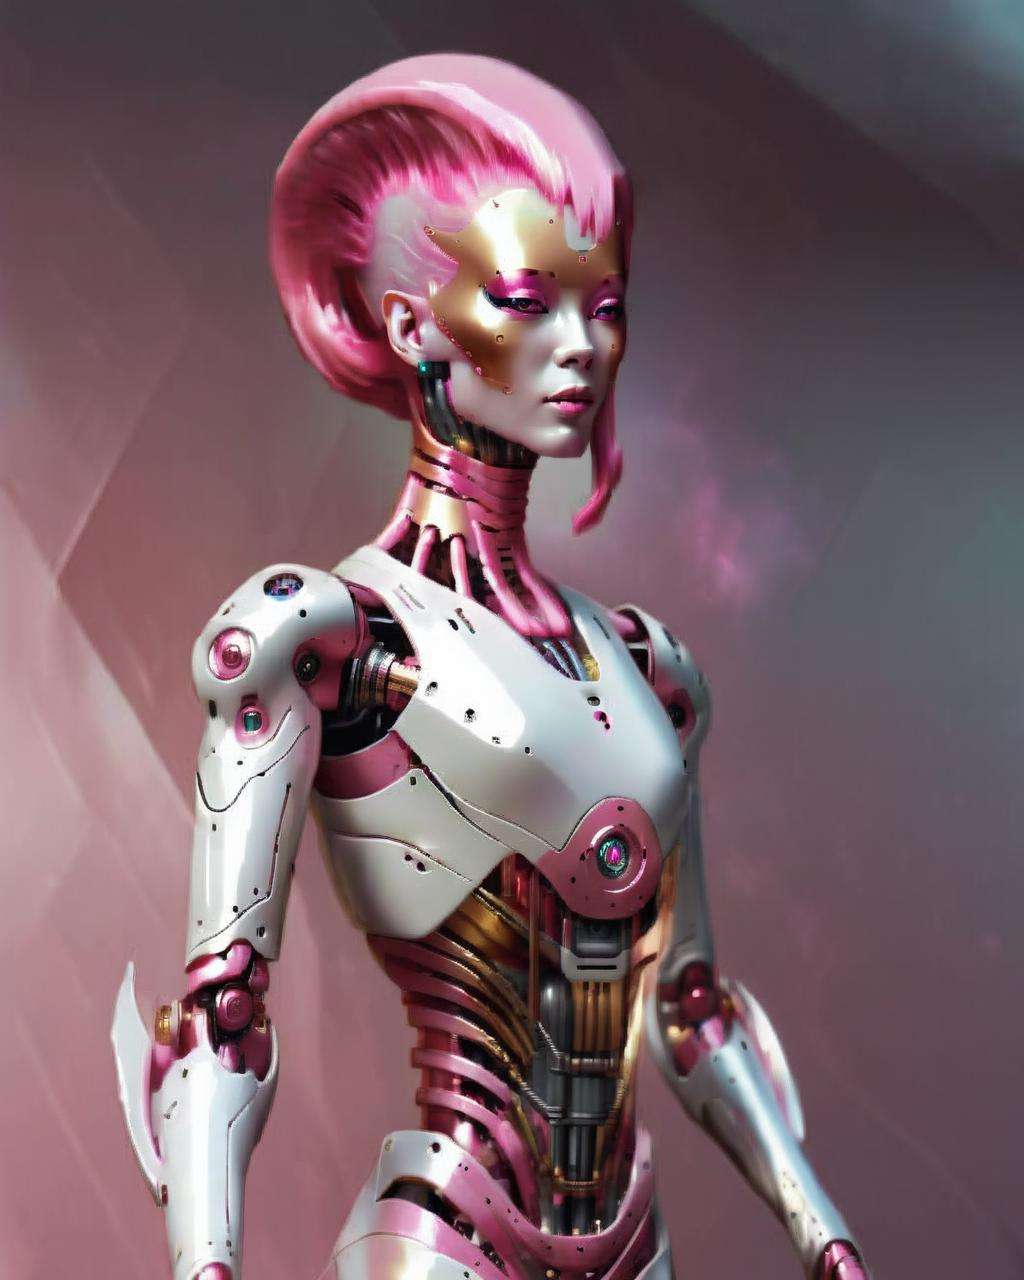 alien god , a woman in a shiny suit with pink hair robotic<lora:alien_god_V2:1.0>